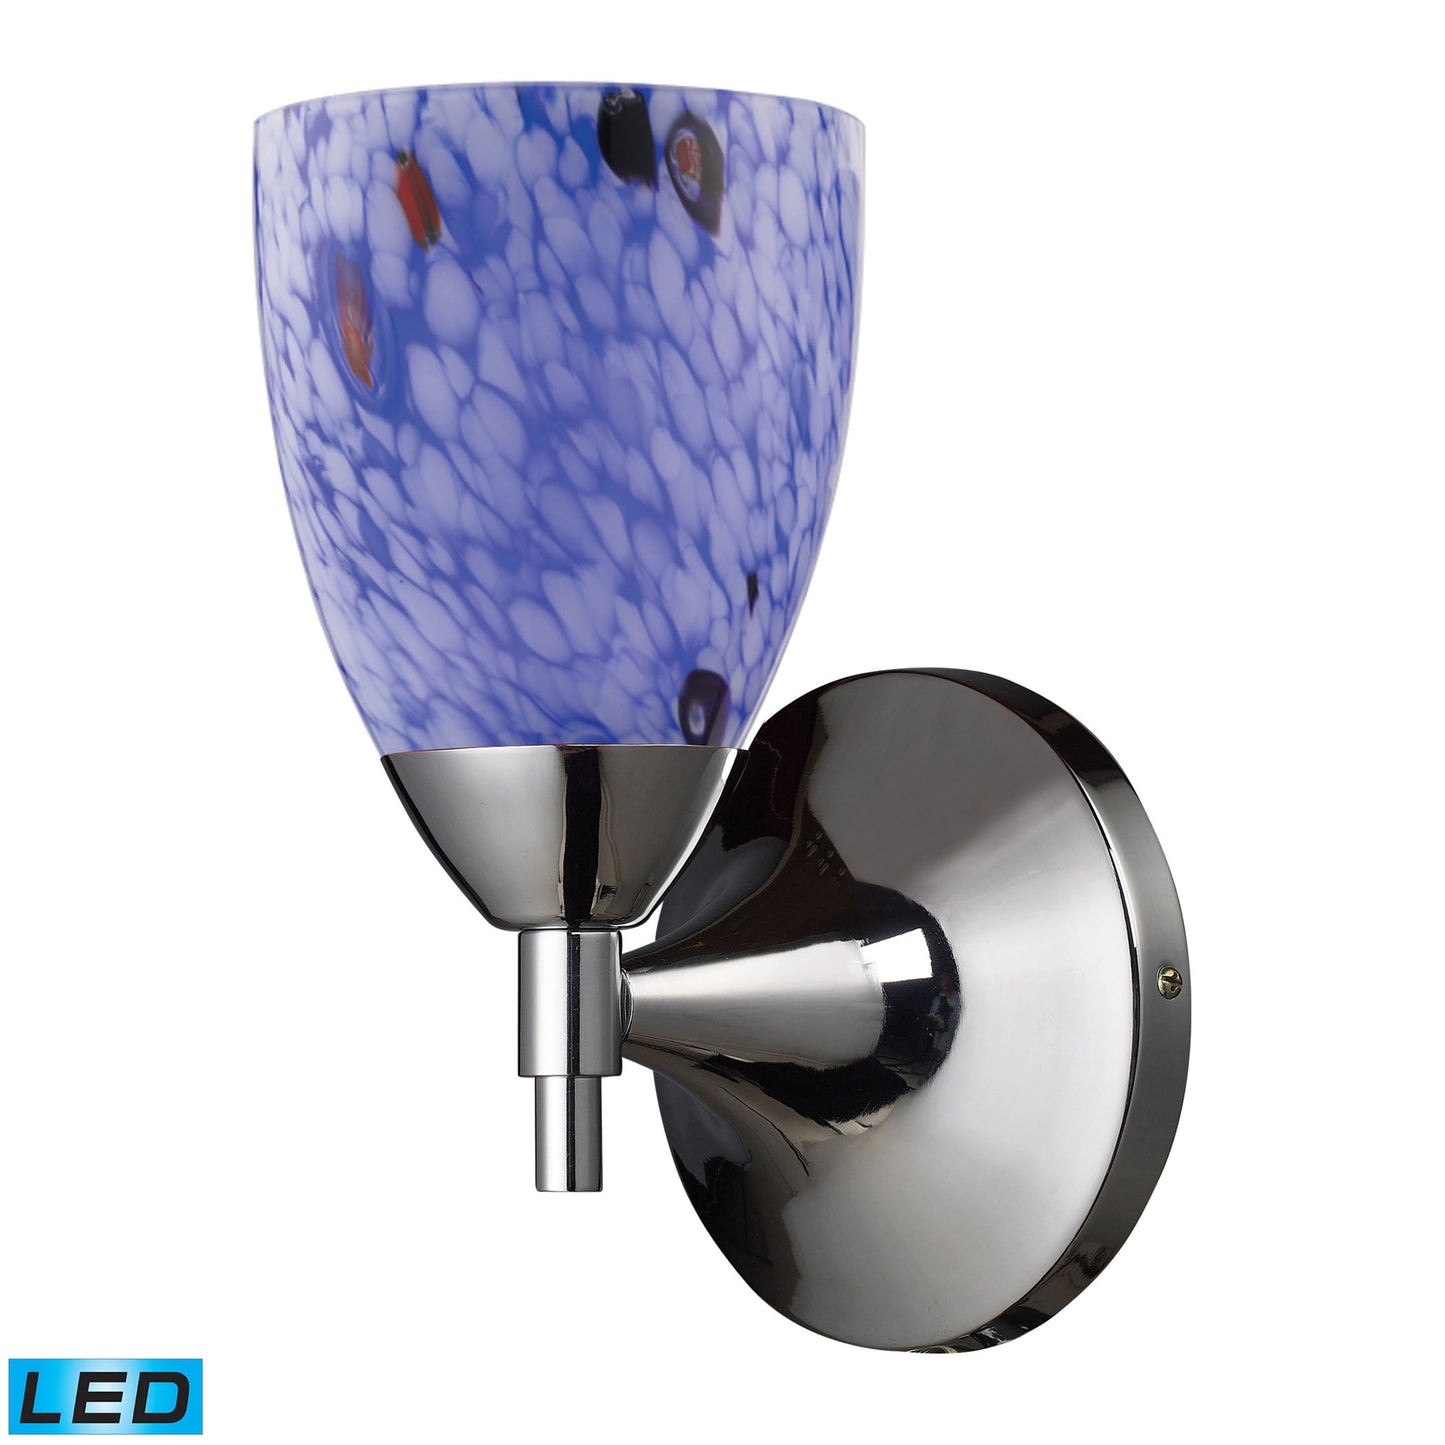 Celina 1-Light Wall Lamp in Polished Chrome with Starburst Blue Glass - Includes LED Bulb